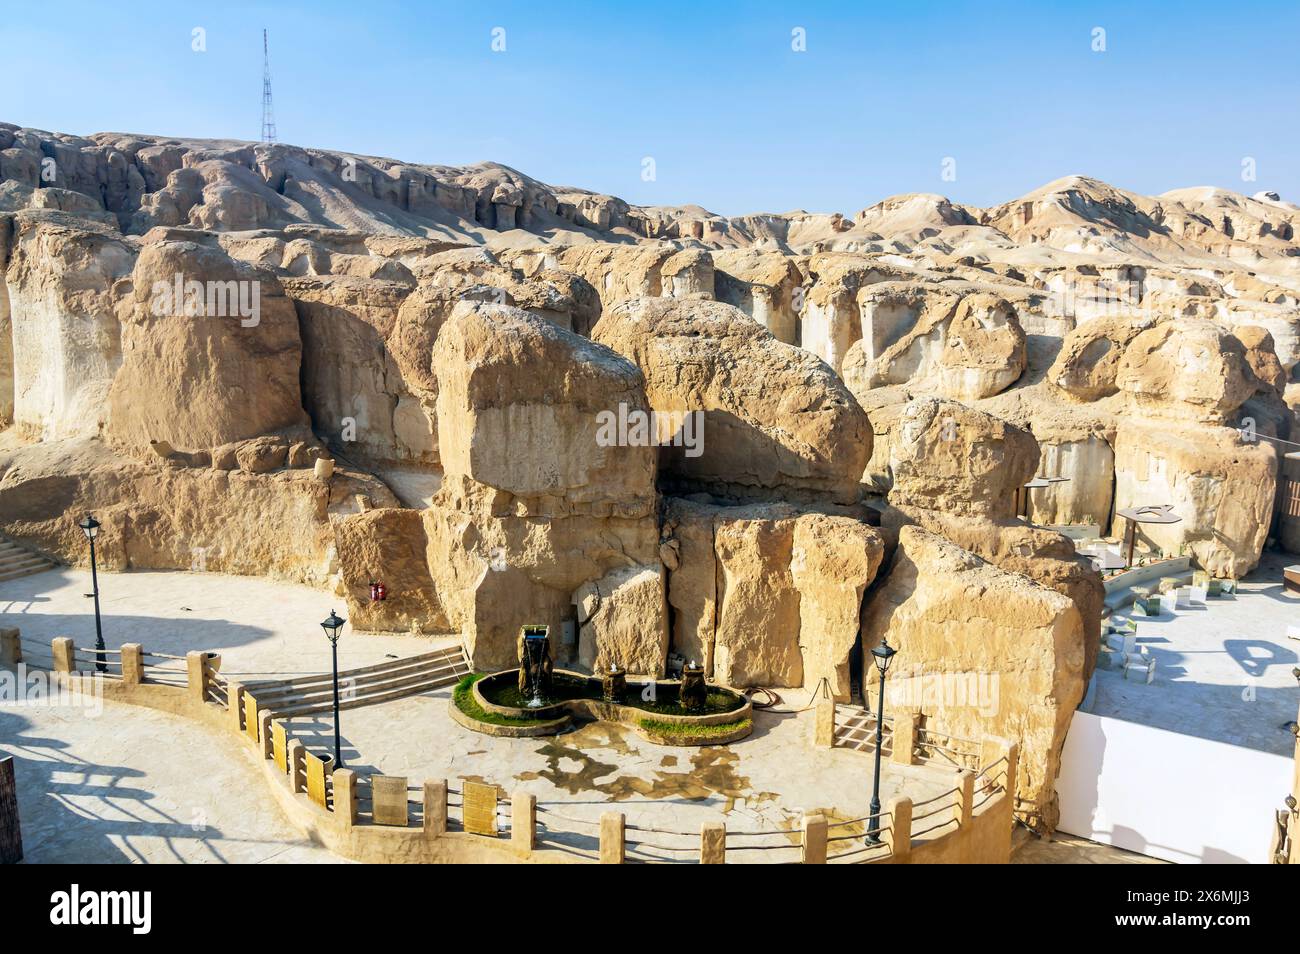 Limestone cliffs on Al-Qarah Mountain, in the largest oasis in the world, Al Ahsa. UNESCO World Heritage Site Stock Photo